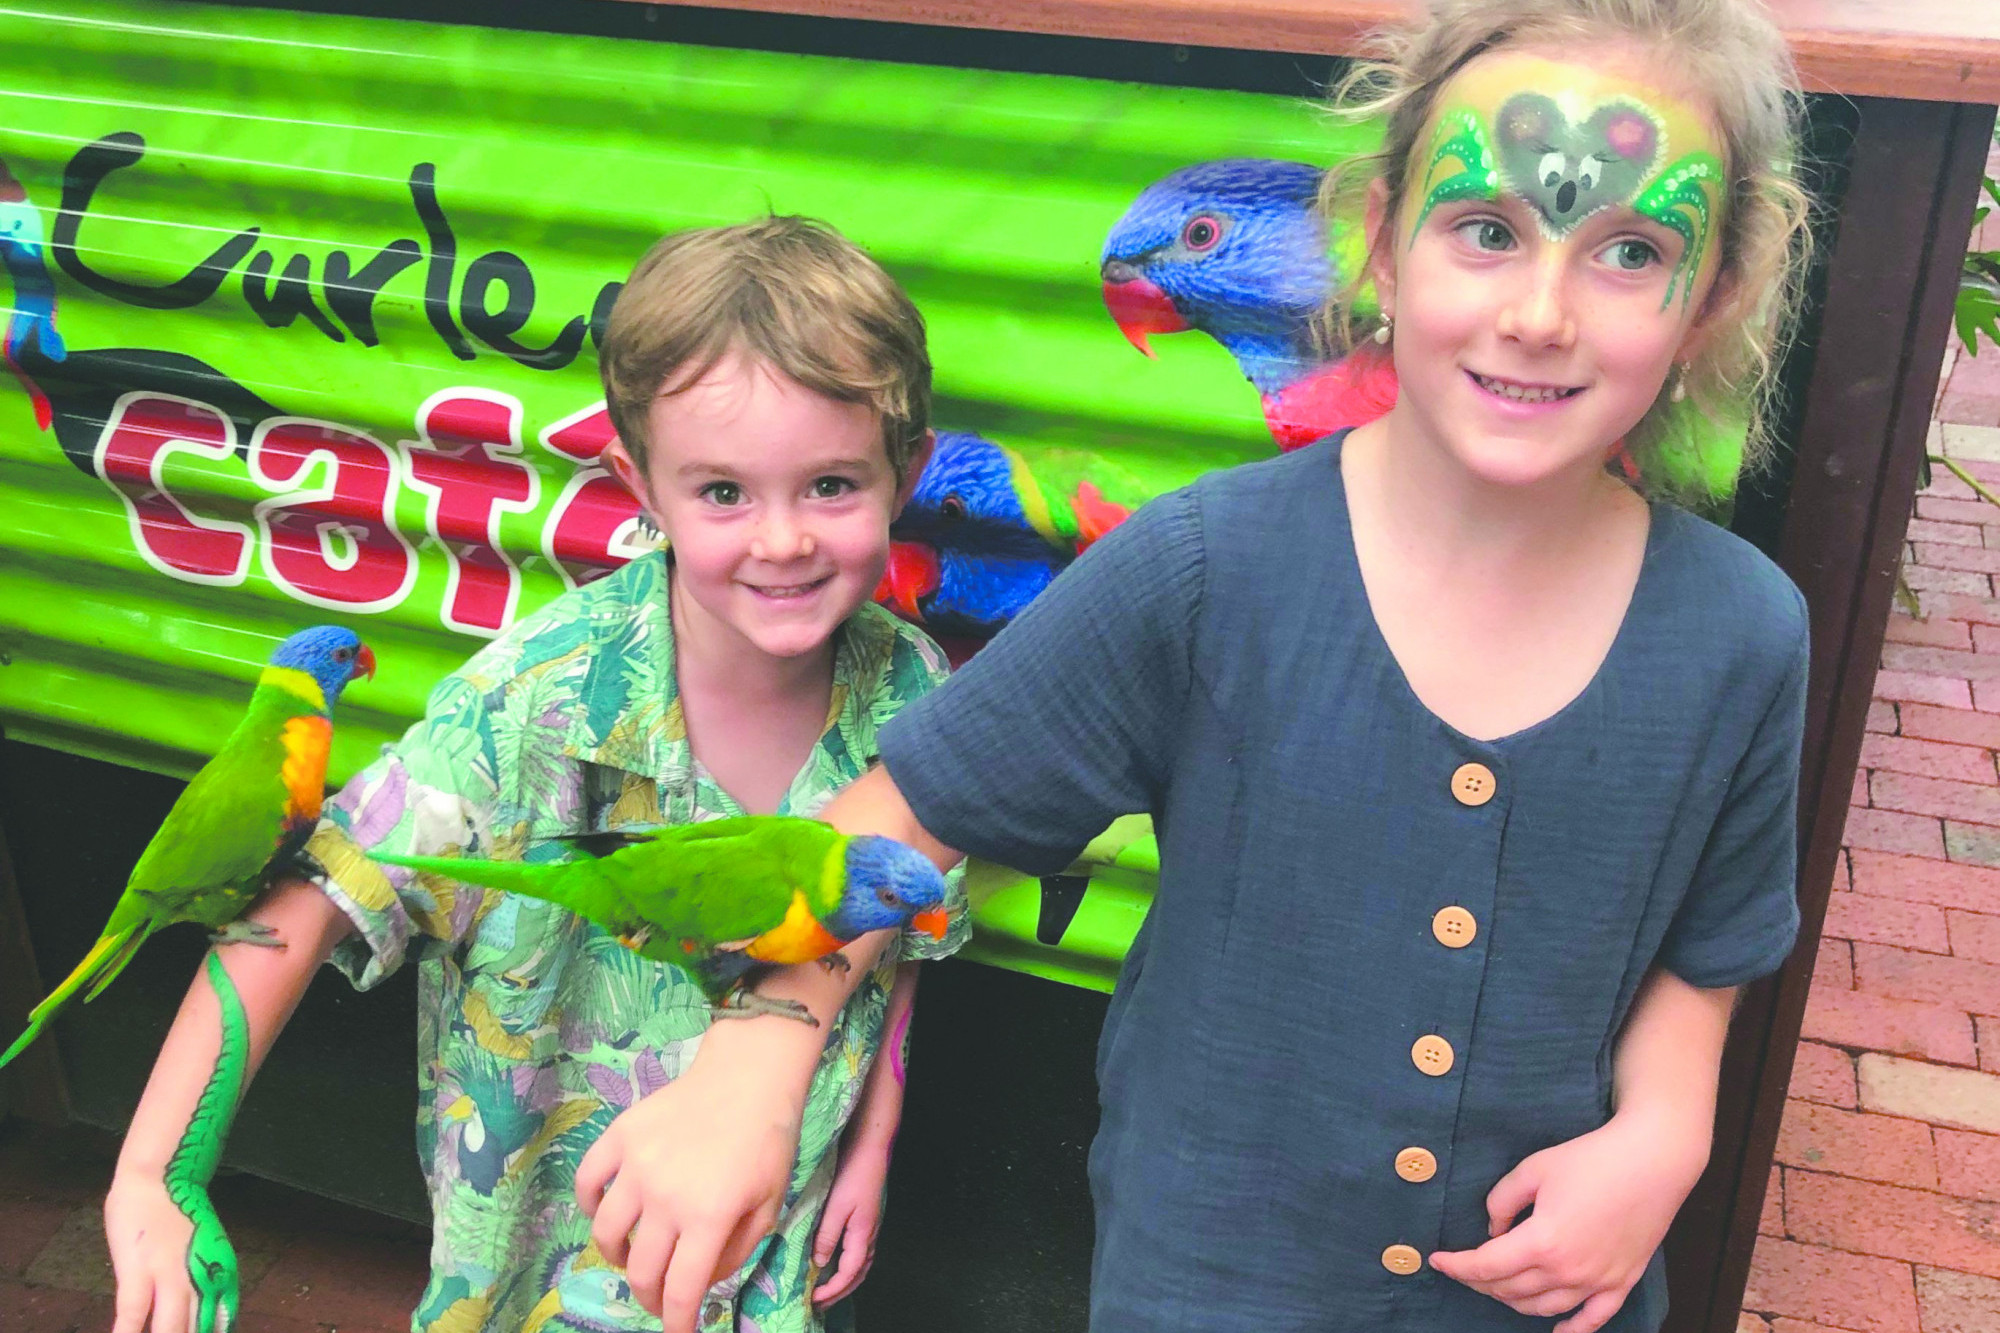 New rainforest aviary a huge hit - feature photo